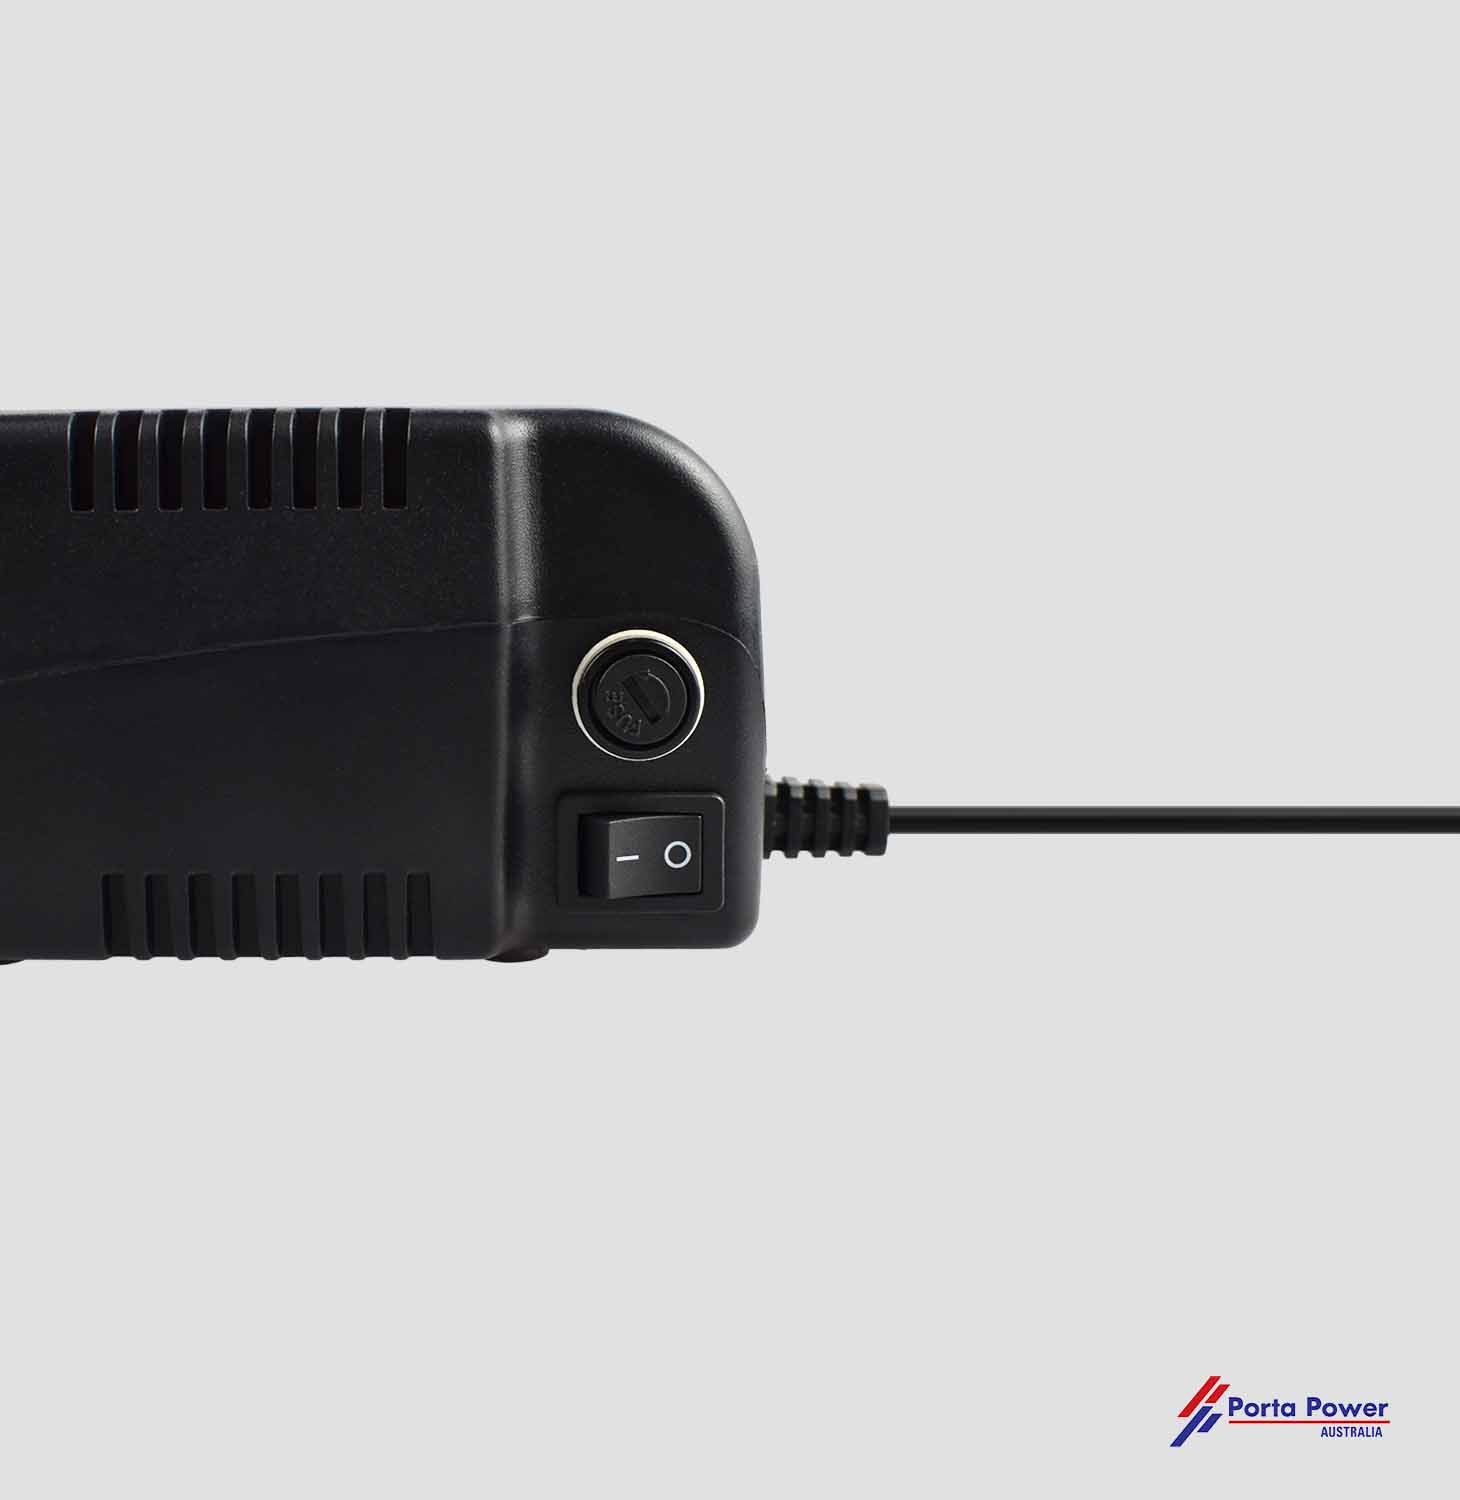 240V AC Charger (Suitable for PORTA POWER P7, P1224) 4Amp LSA-40